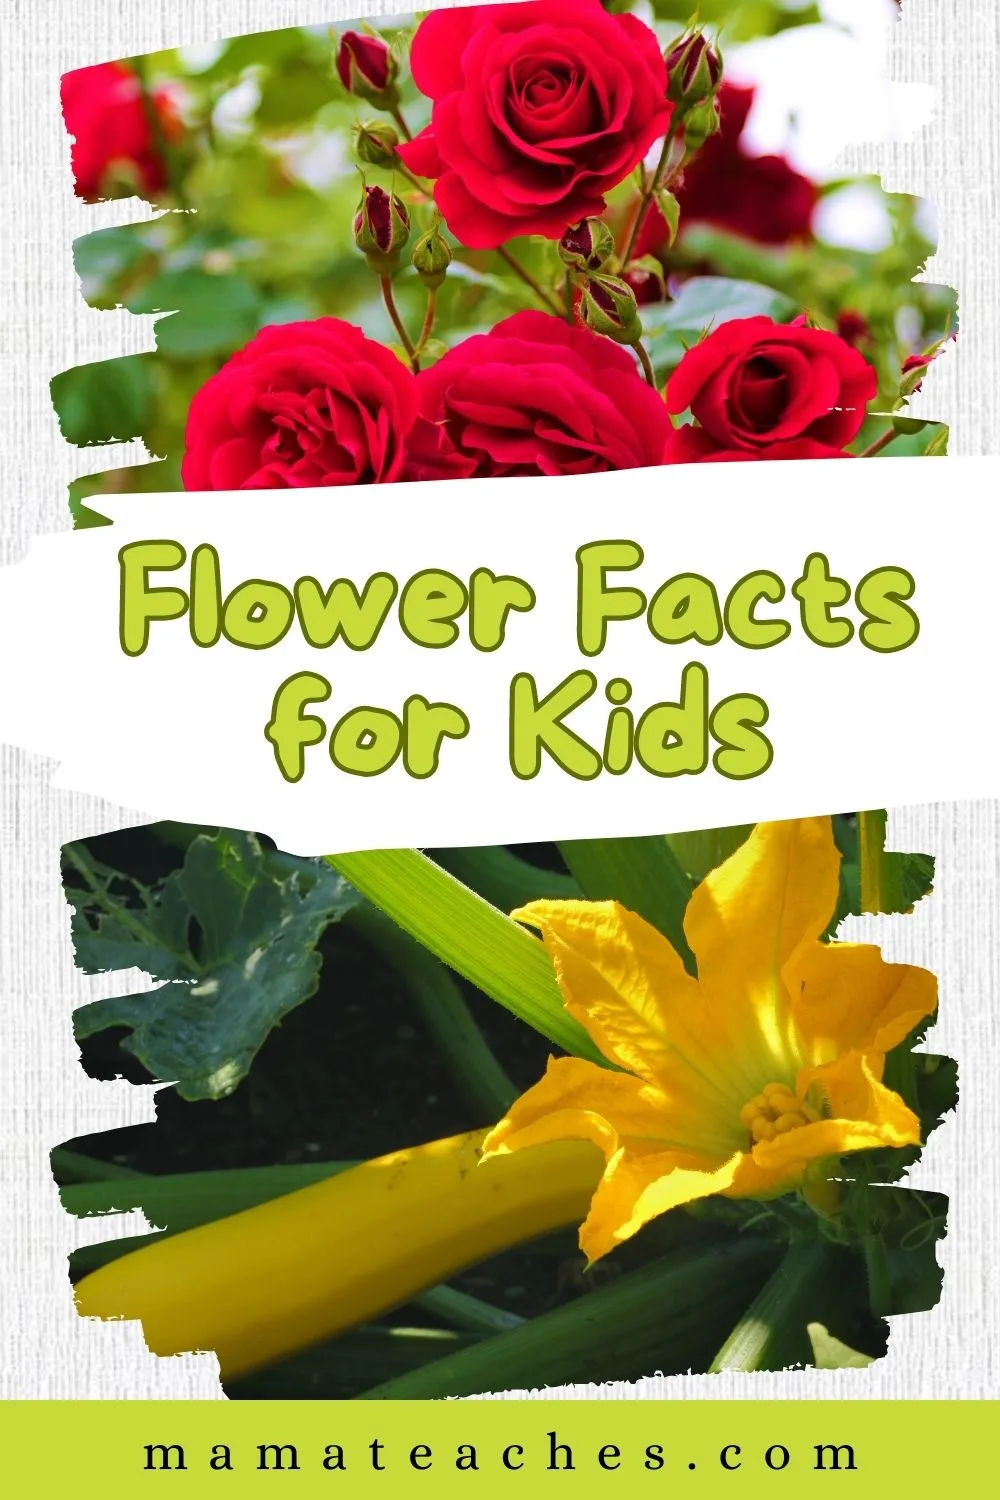 Flower Facts for Kids